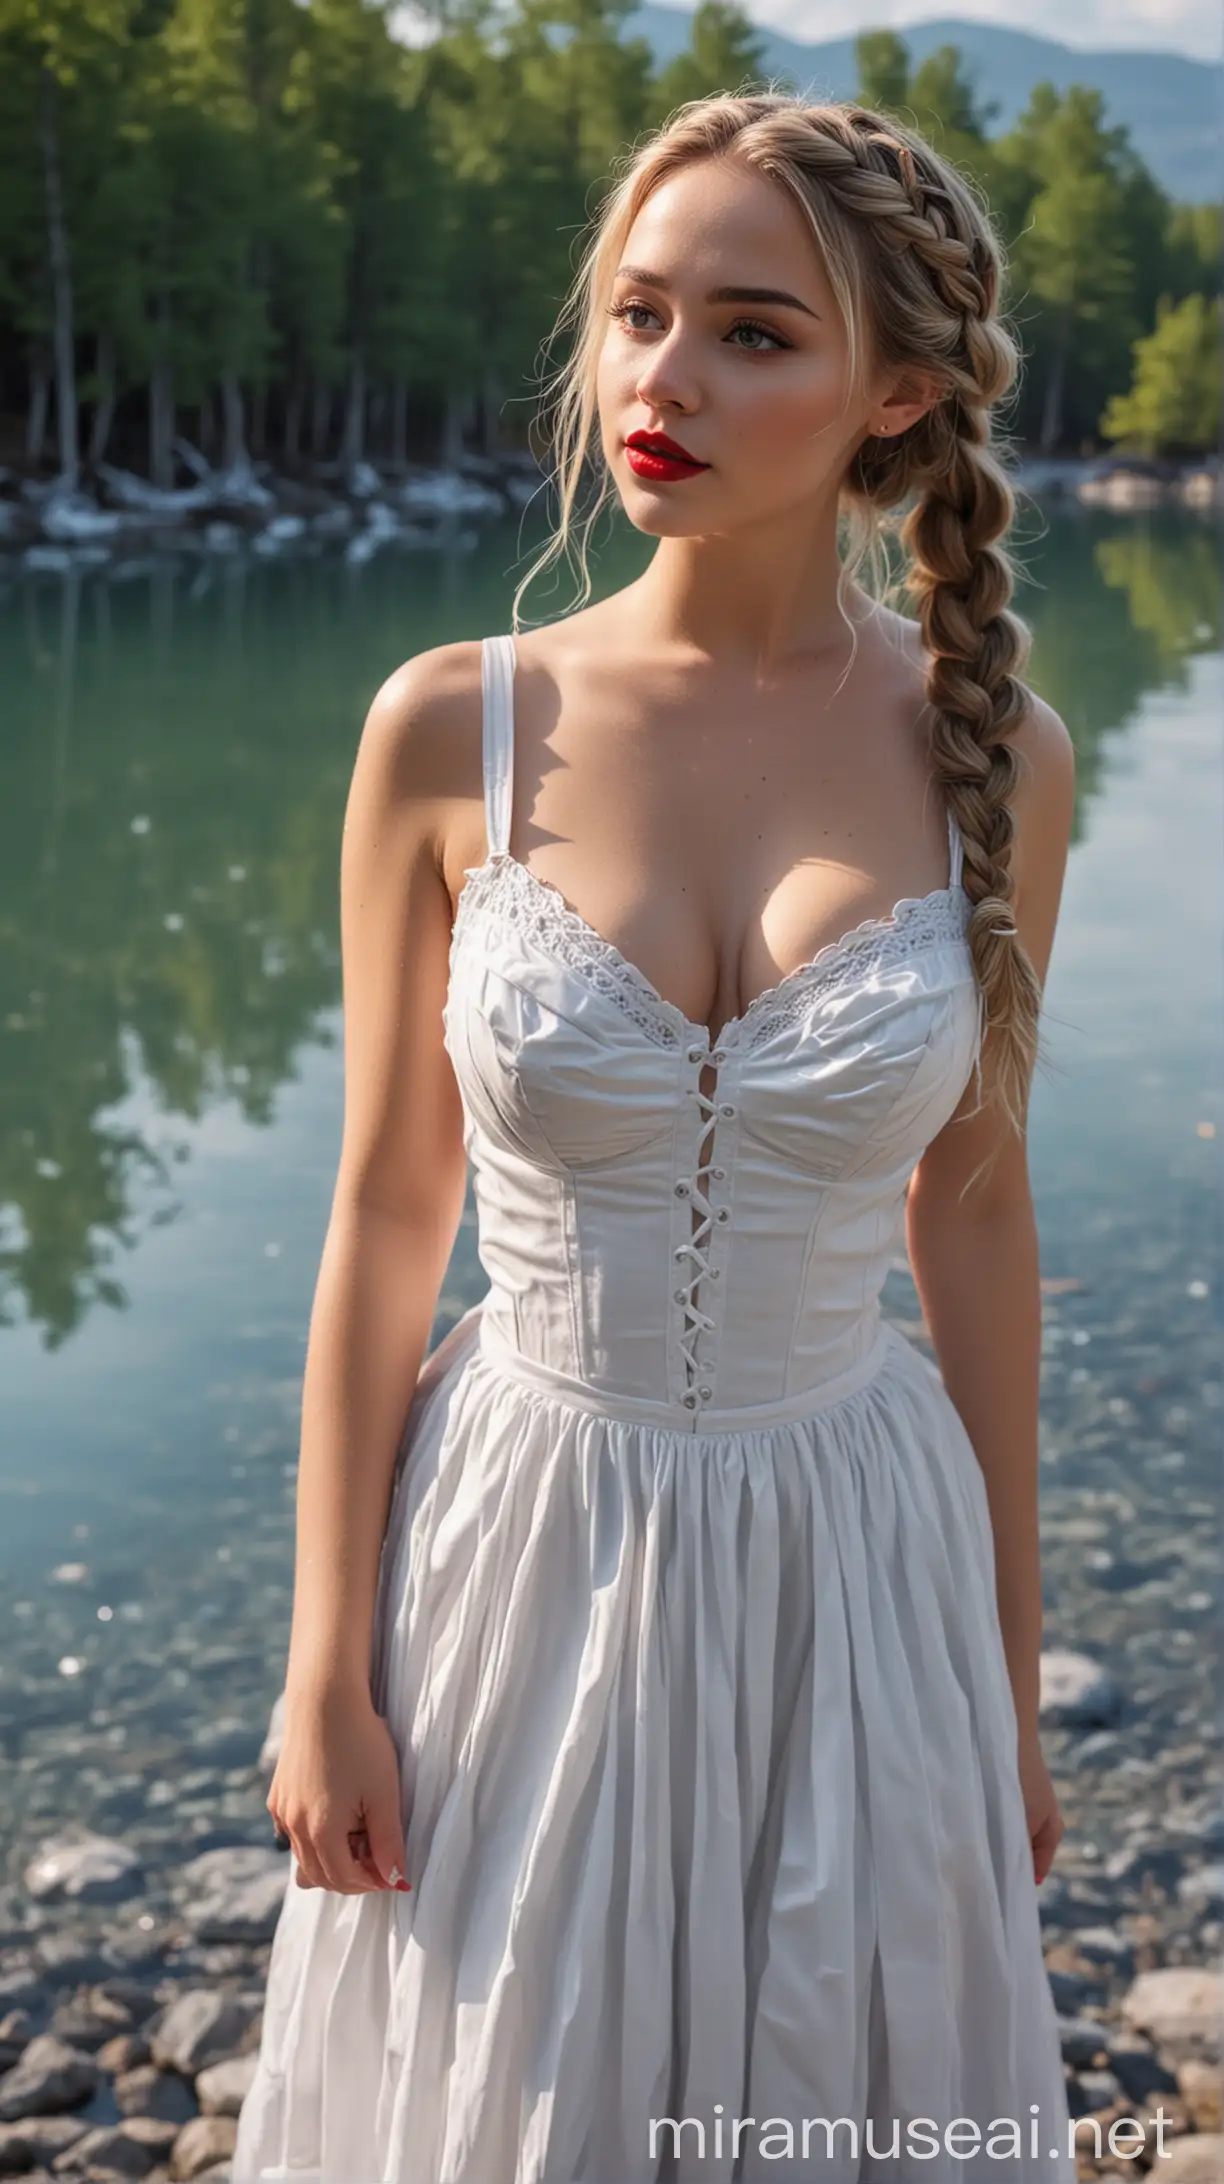 4k Ai art full body beautiful USA girl French braid hair red lipstick nose ring ear tops lacket in neck high heels full white dress bra big saggy boobs in usa frozen lake